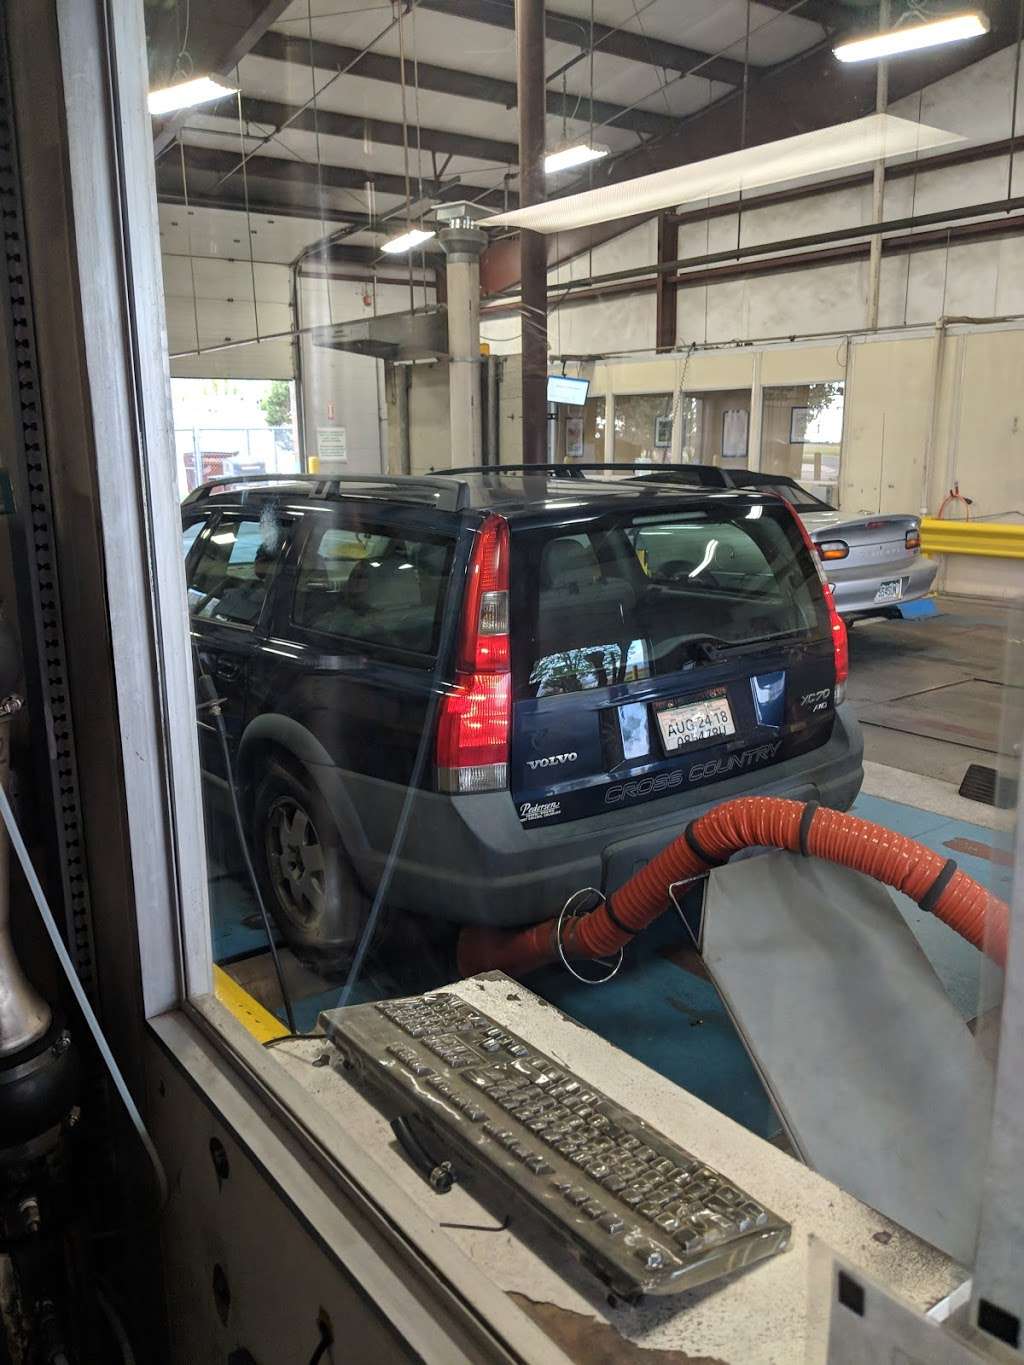 Air Care Colorado Emissions Testing Station | 4040 Rogers Rd, Longmont, CO 80503 | Phone: (303) 456-7090